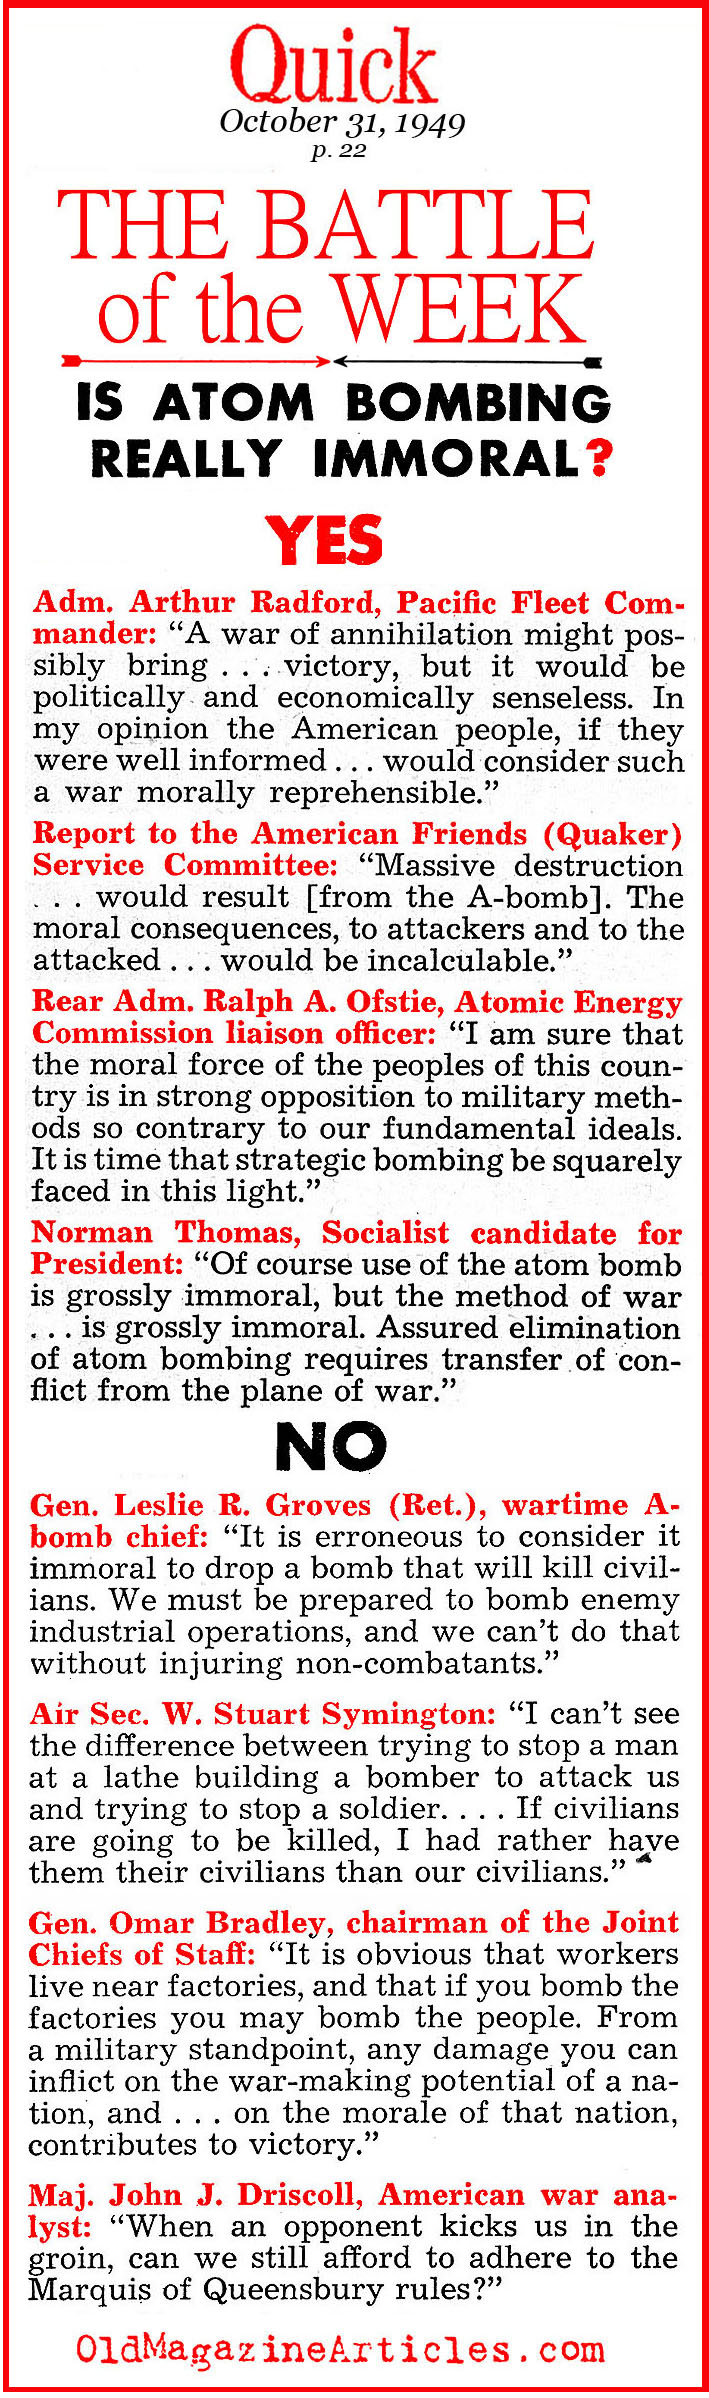 Would Nuking the USSR Have Been an Immoral Act? (Quick Magazine, 1949)